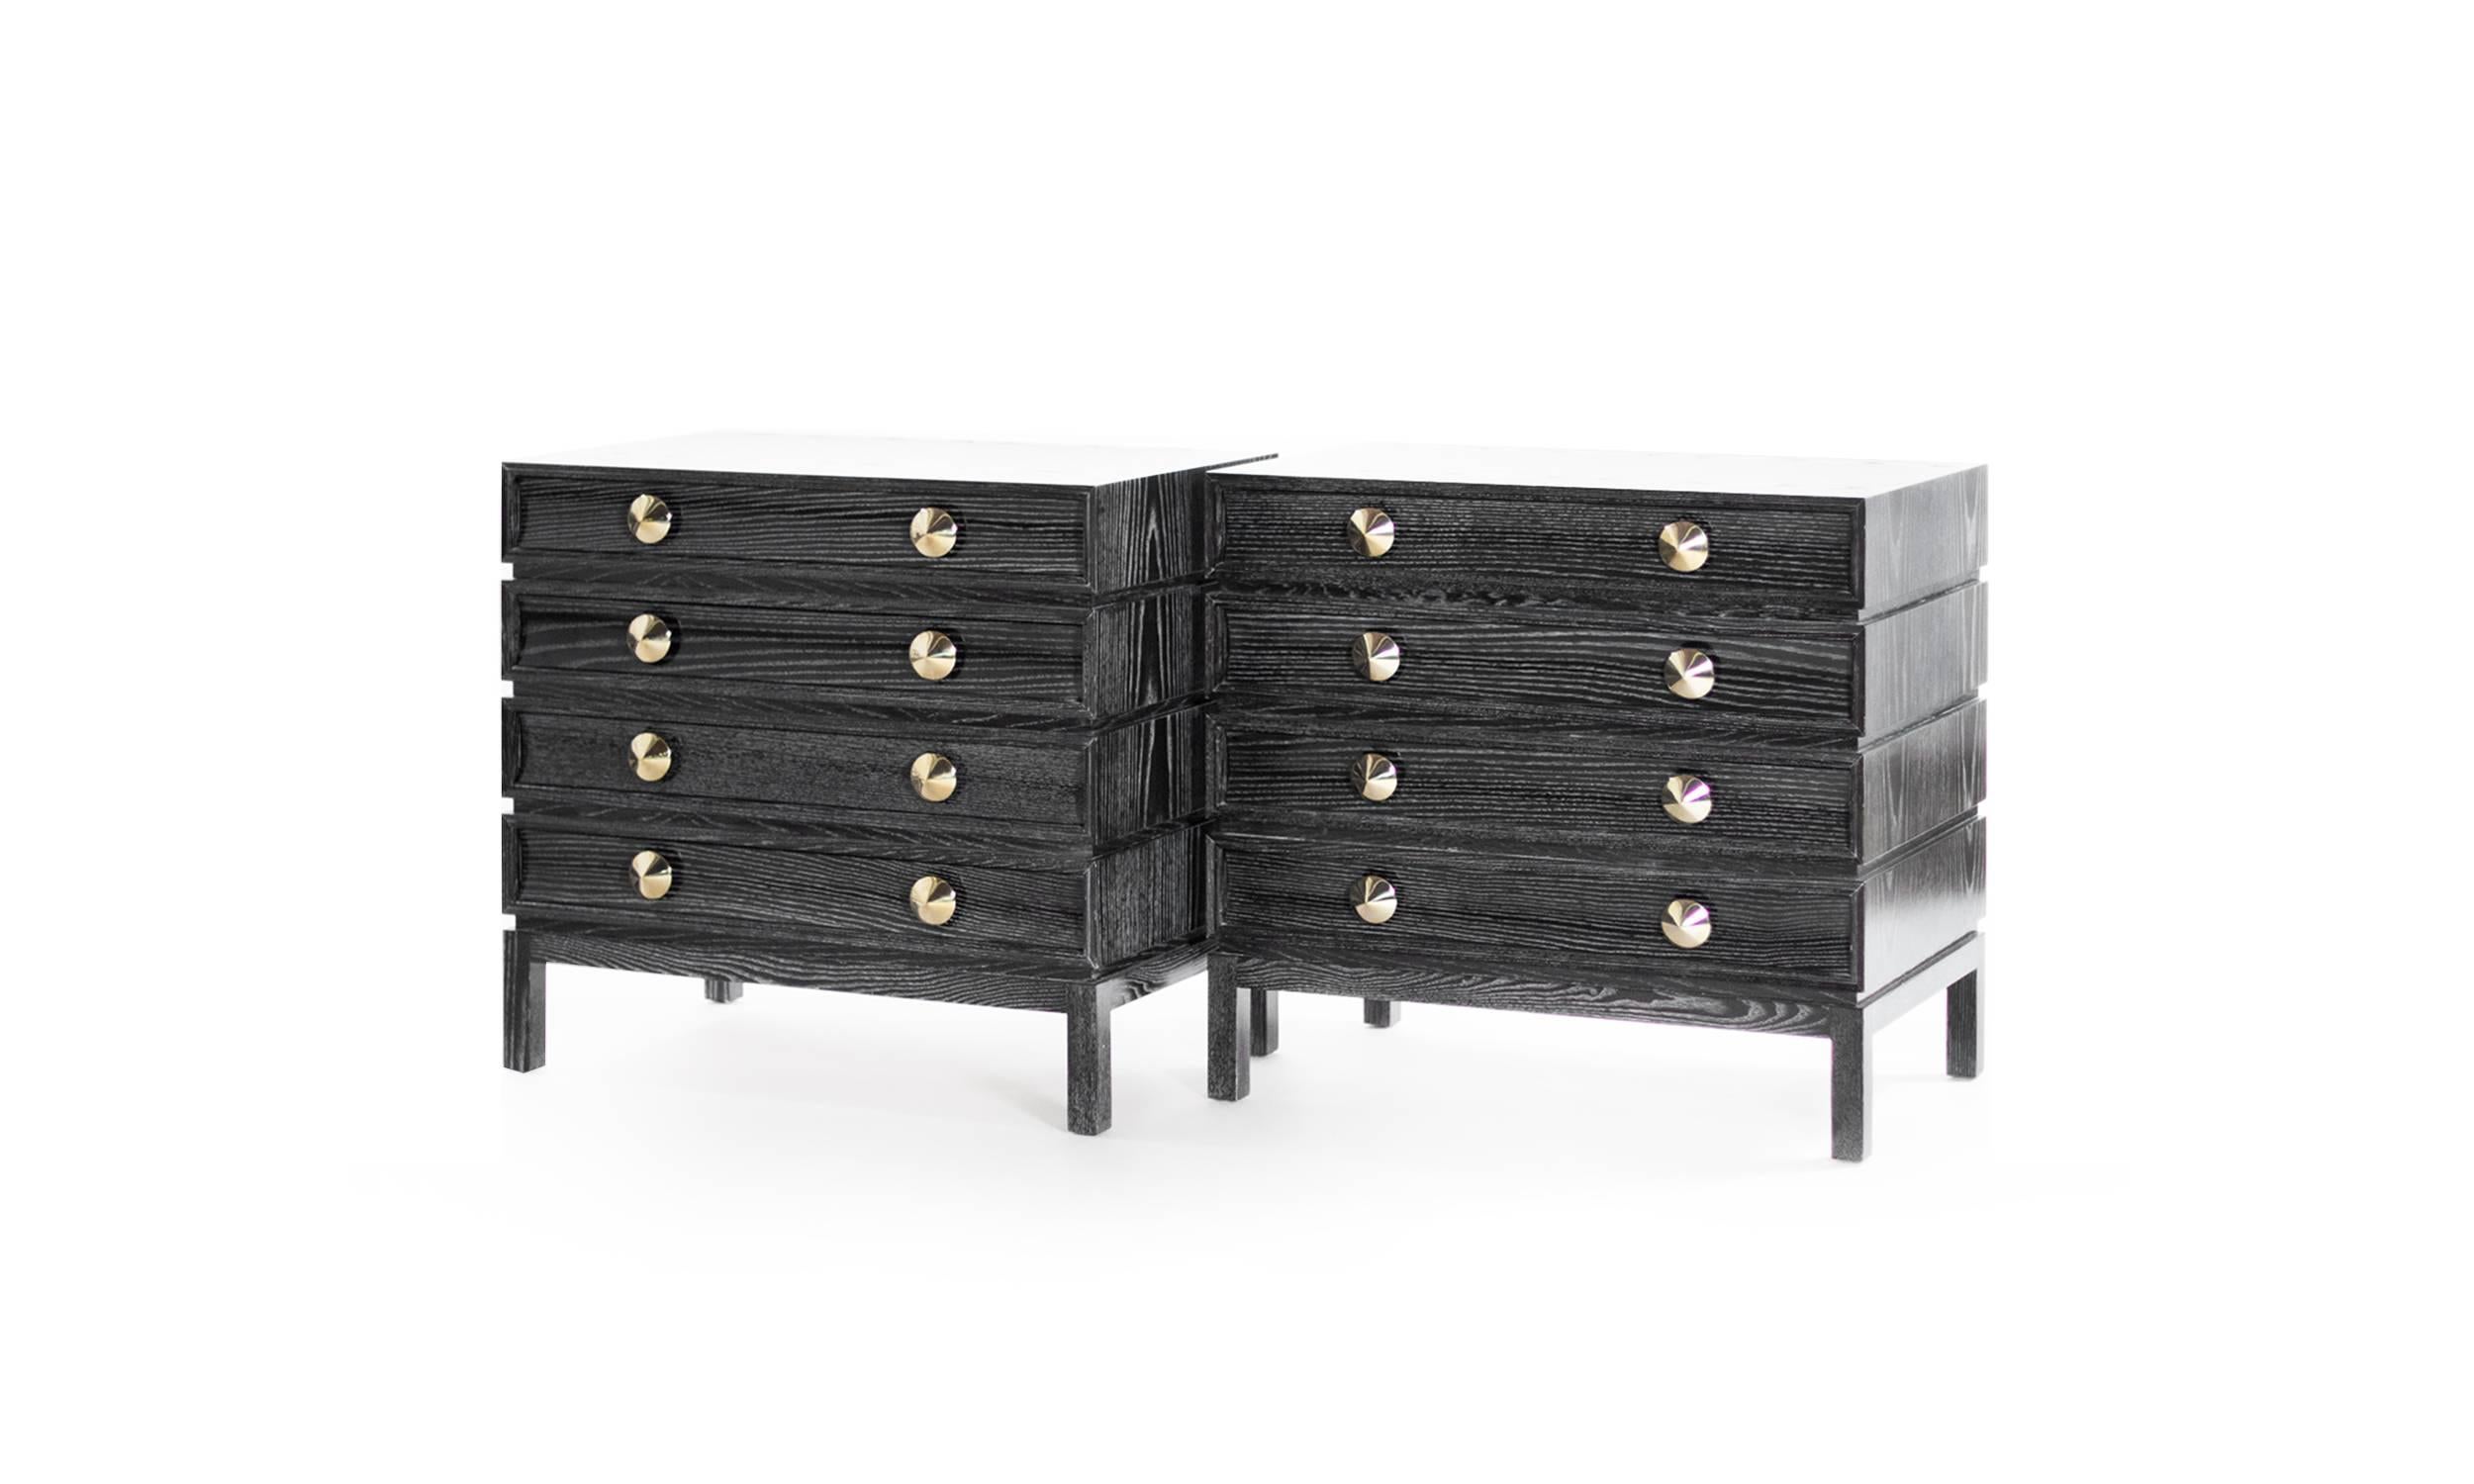 Inspired by the iconic designer Paul Frankl, these rustic modern dressers blend timeless elegance with contemporary flair. The oversized drawer frames and subtly curved fronts create a playful asymmetry, while notched sides add a unique touch,